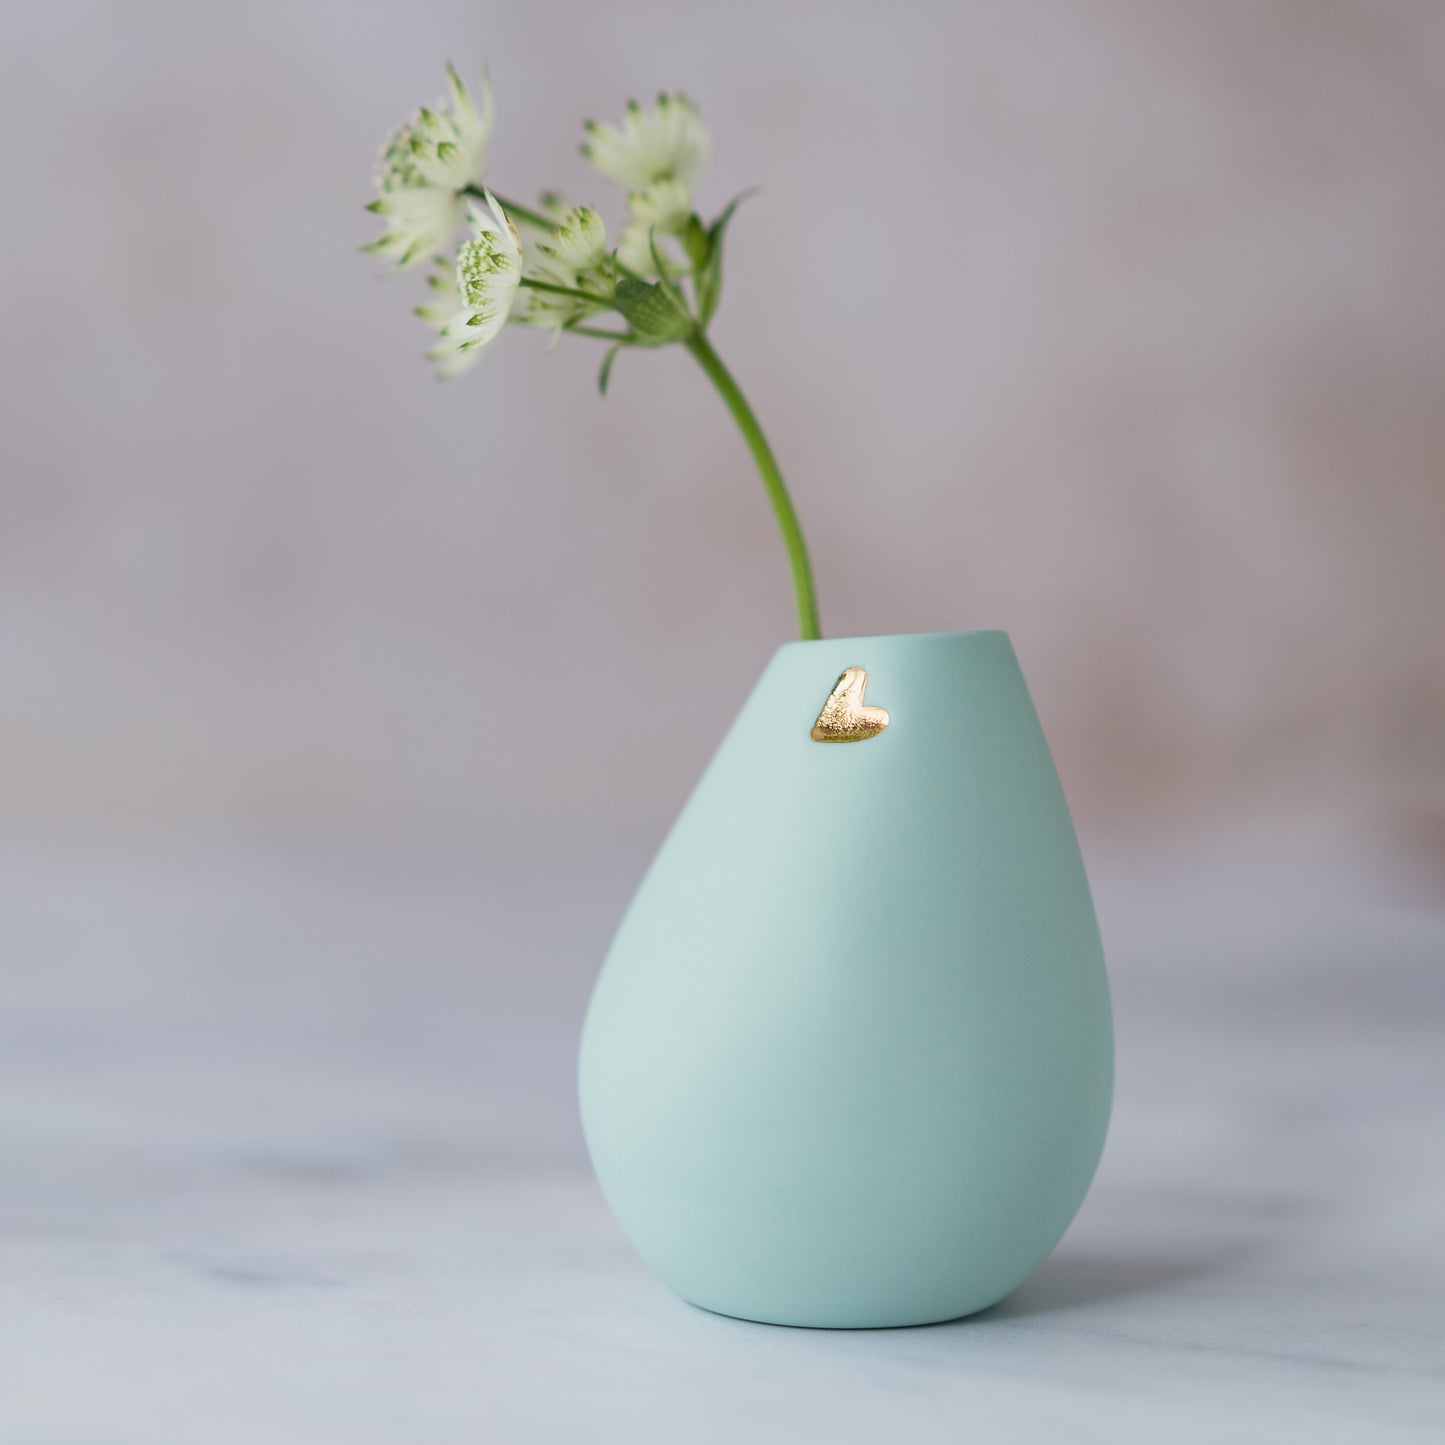 Pastel Mint Bud Vase With An Embossed Gold Heart | Spring Vase | Mother's Day Gifts | Porcelain